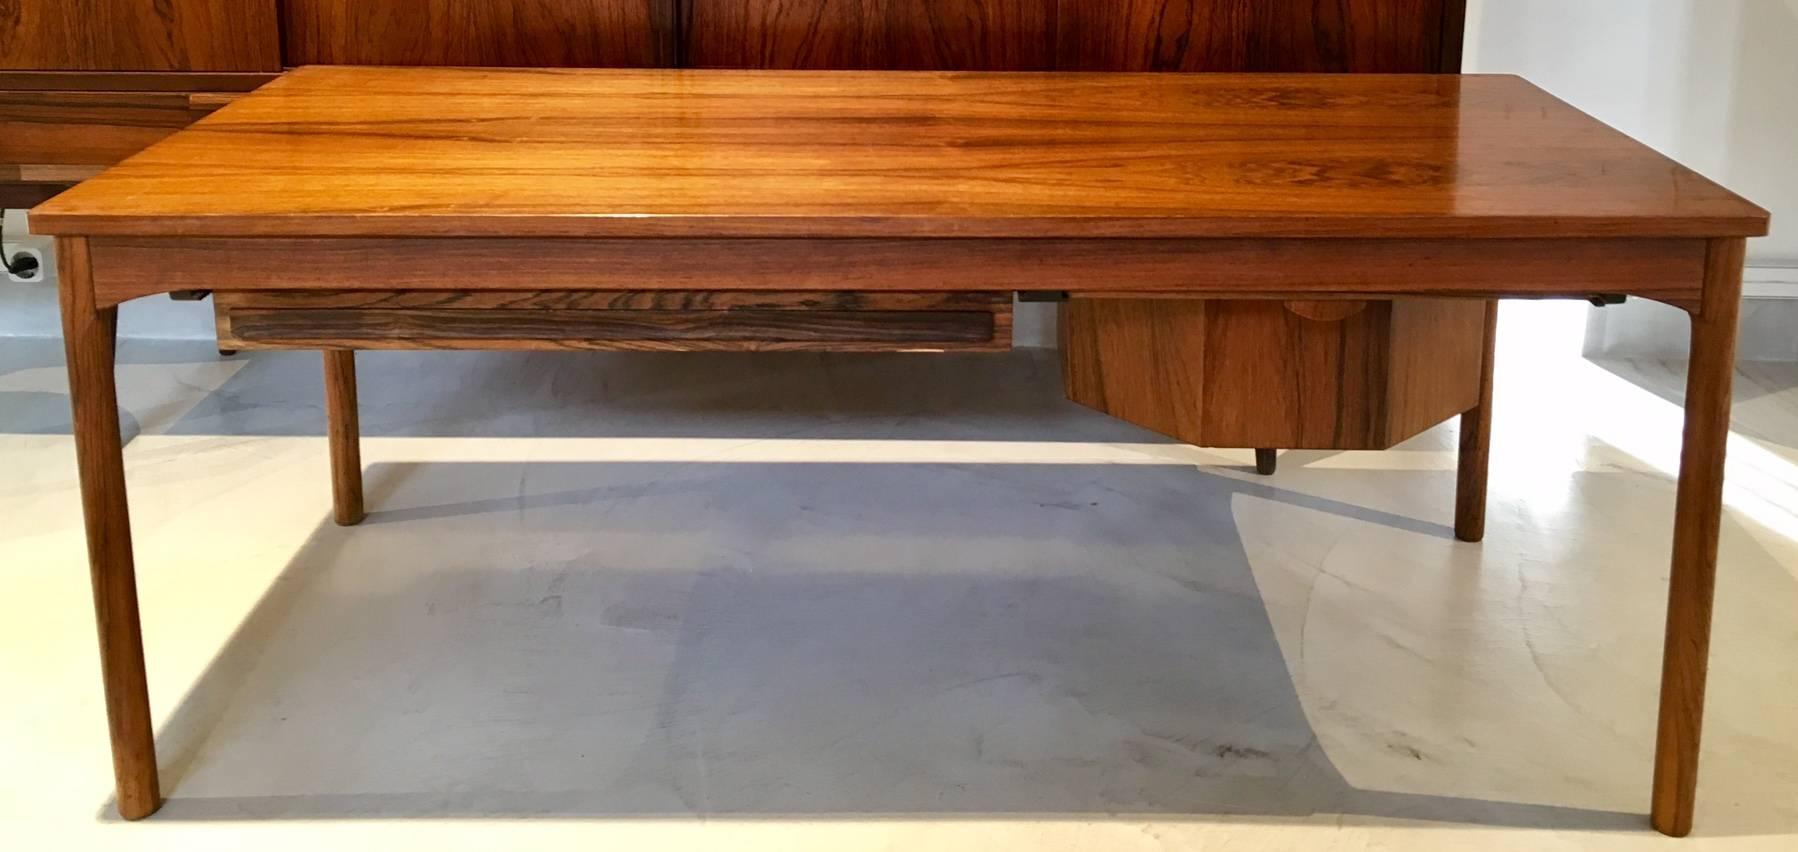 Wooden table with side stretcher and two drawers originally meant for knitting and handicraft materials. Suitable to use as a coffee table. Minor stains and scratches on the tabletop.